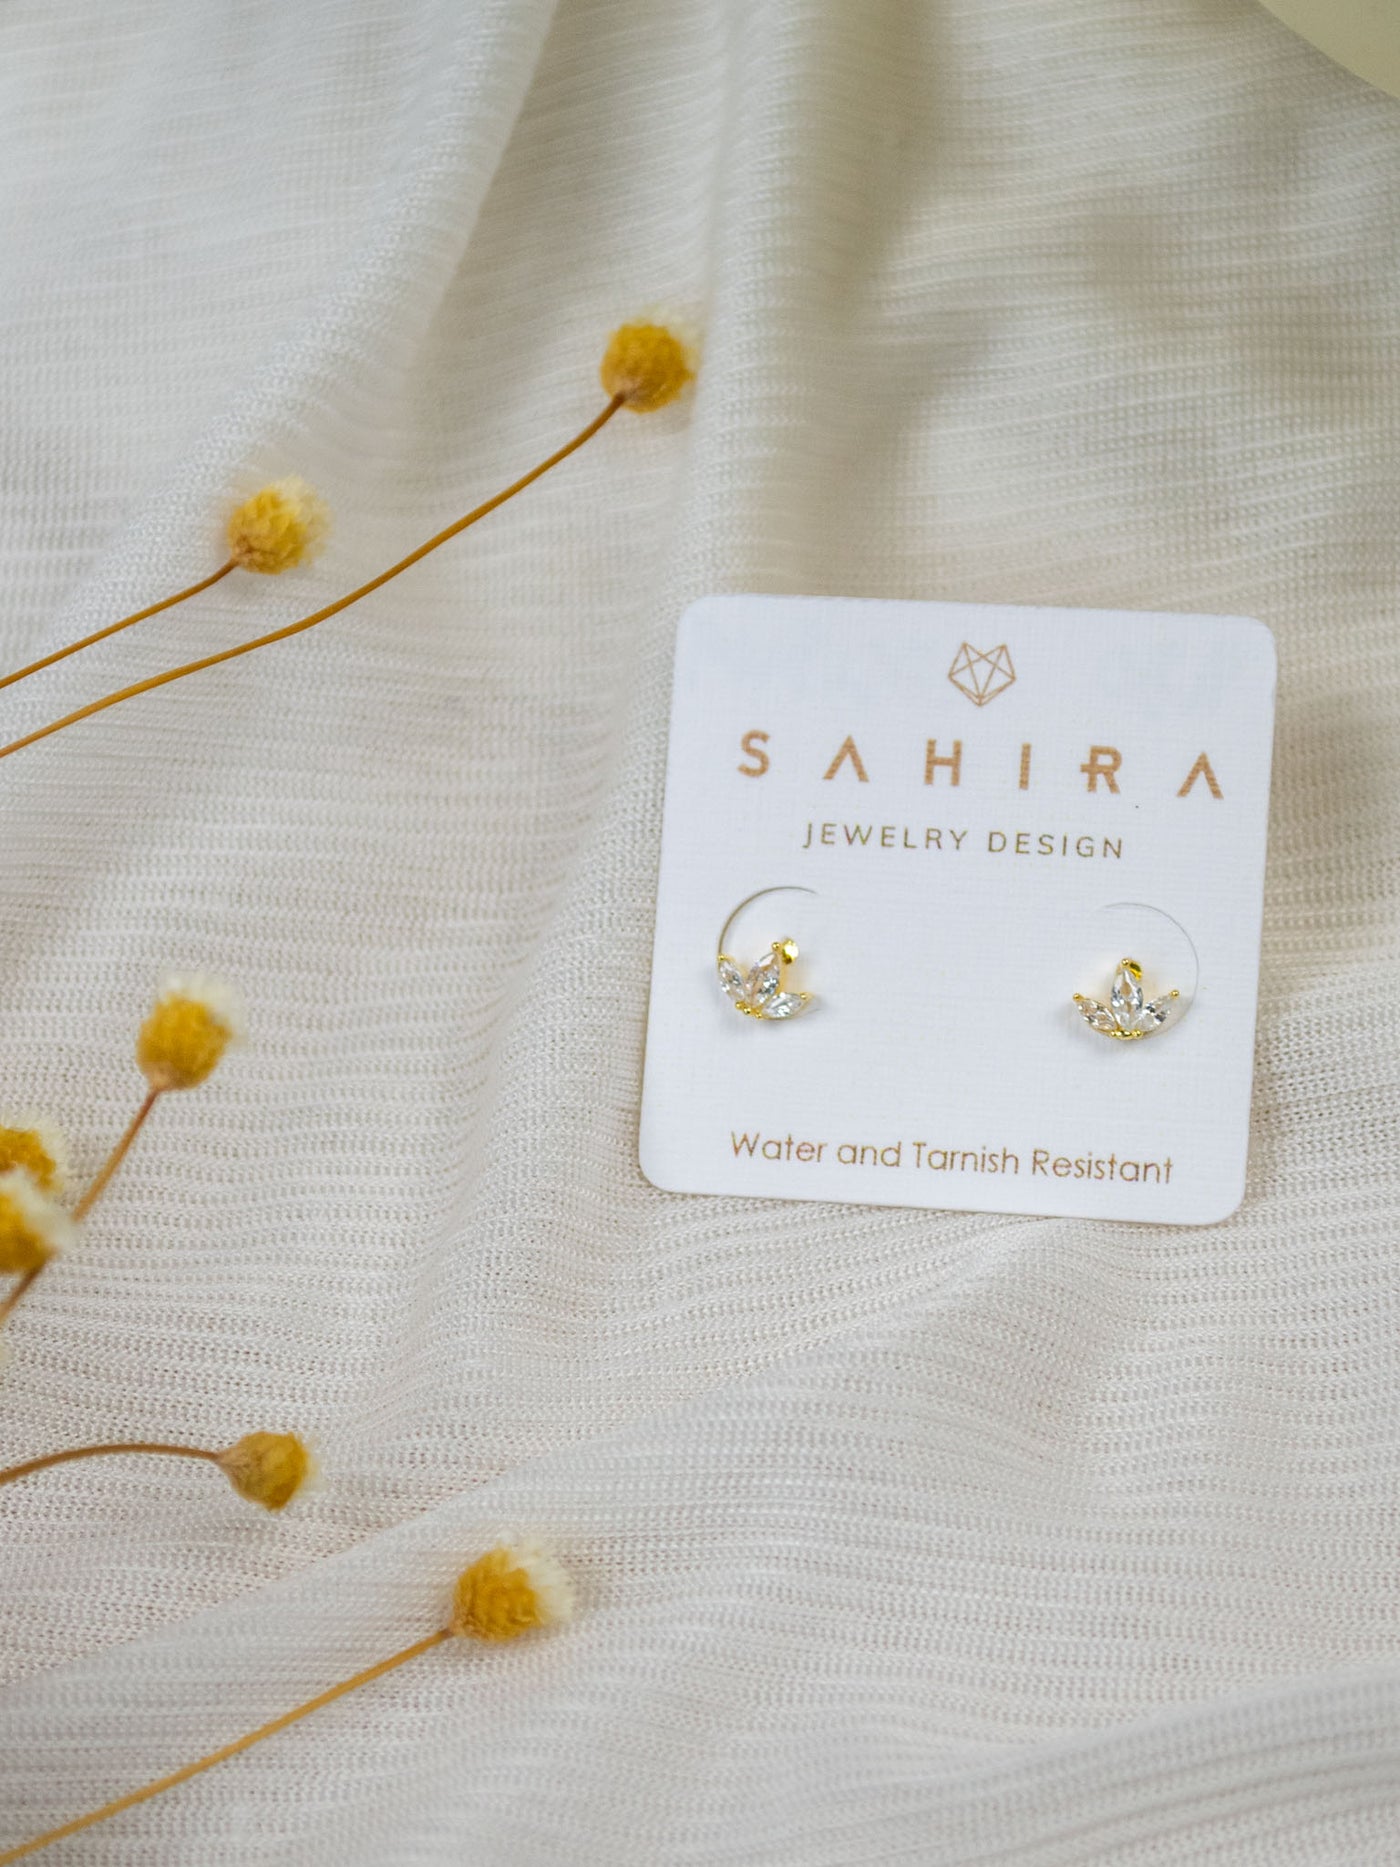 A pair of gold CZ stone stud earrings in a lotus shape.